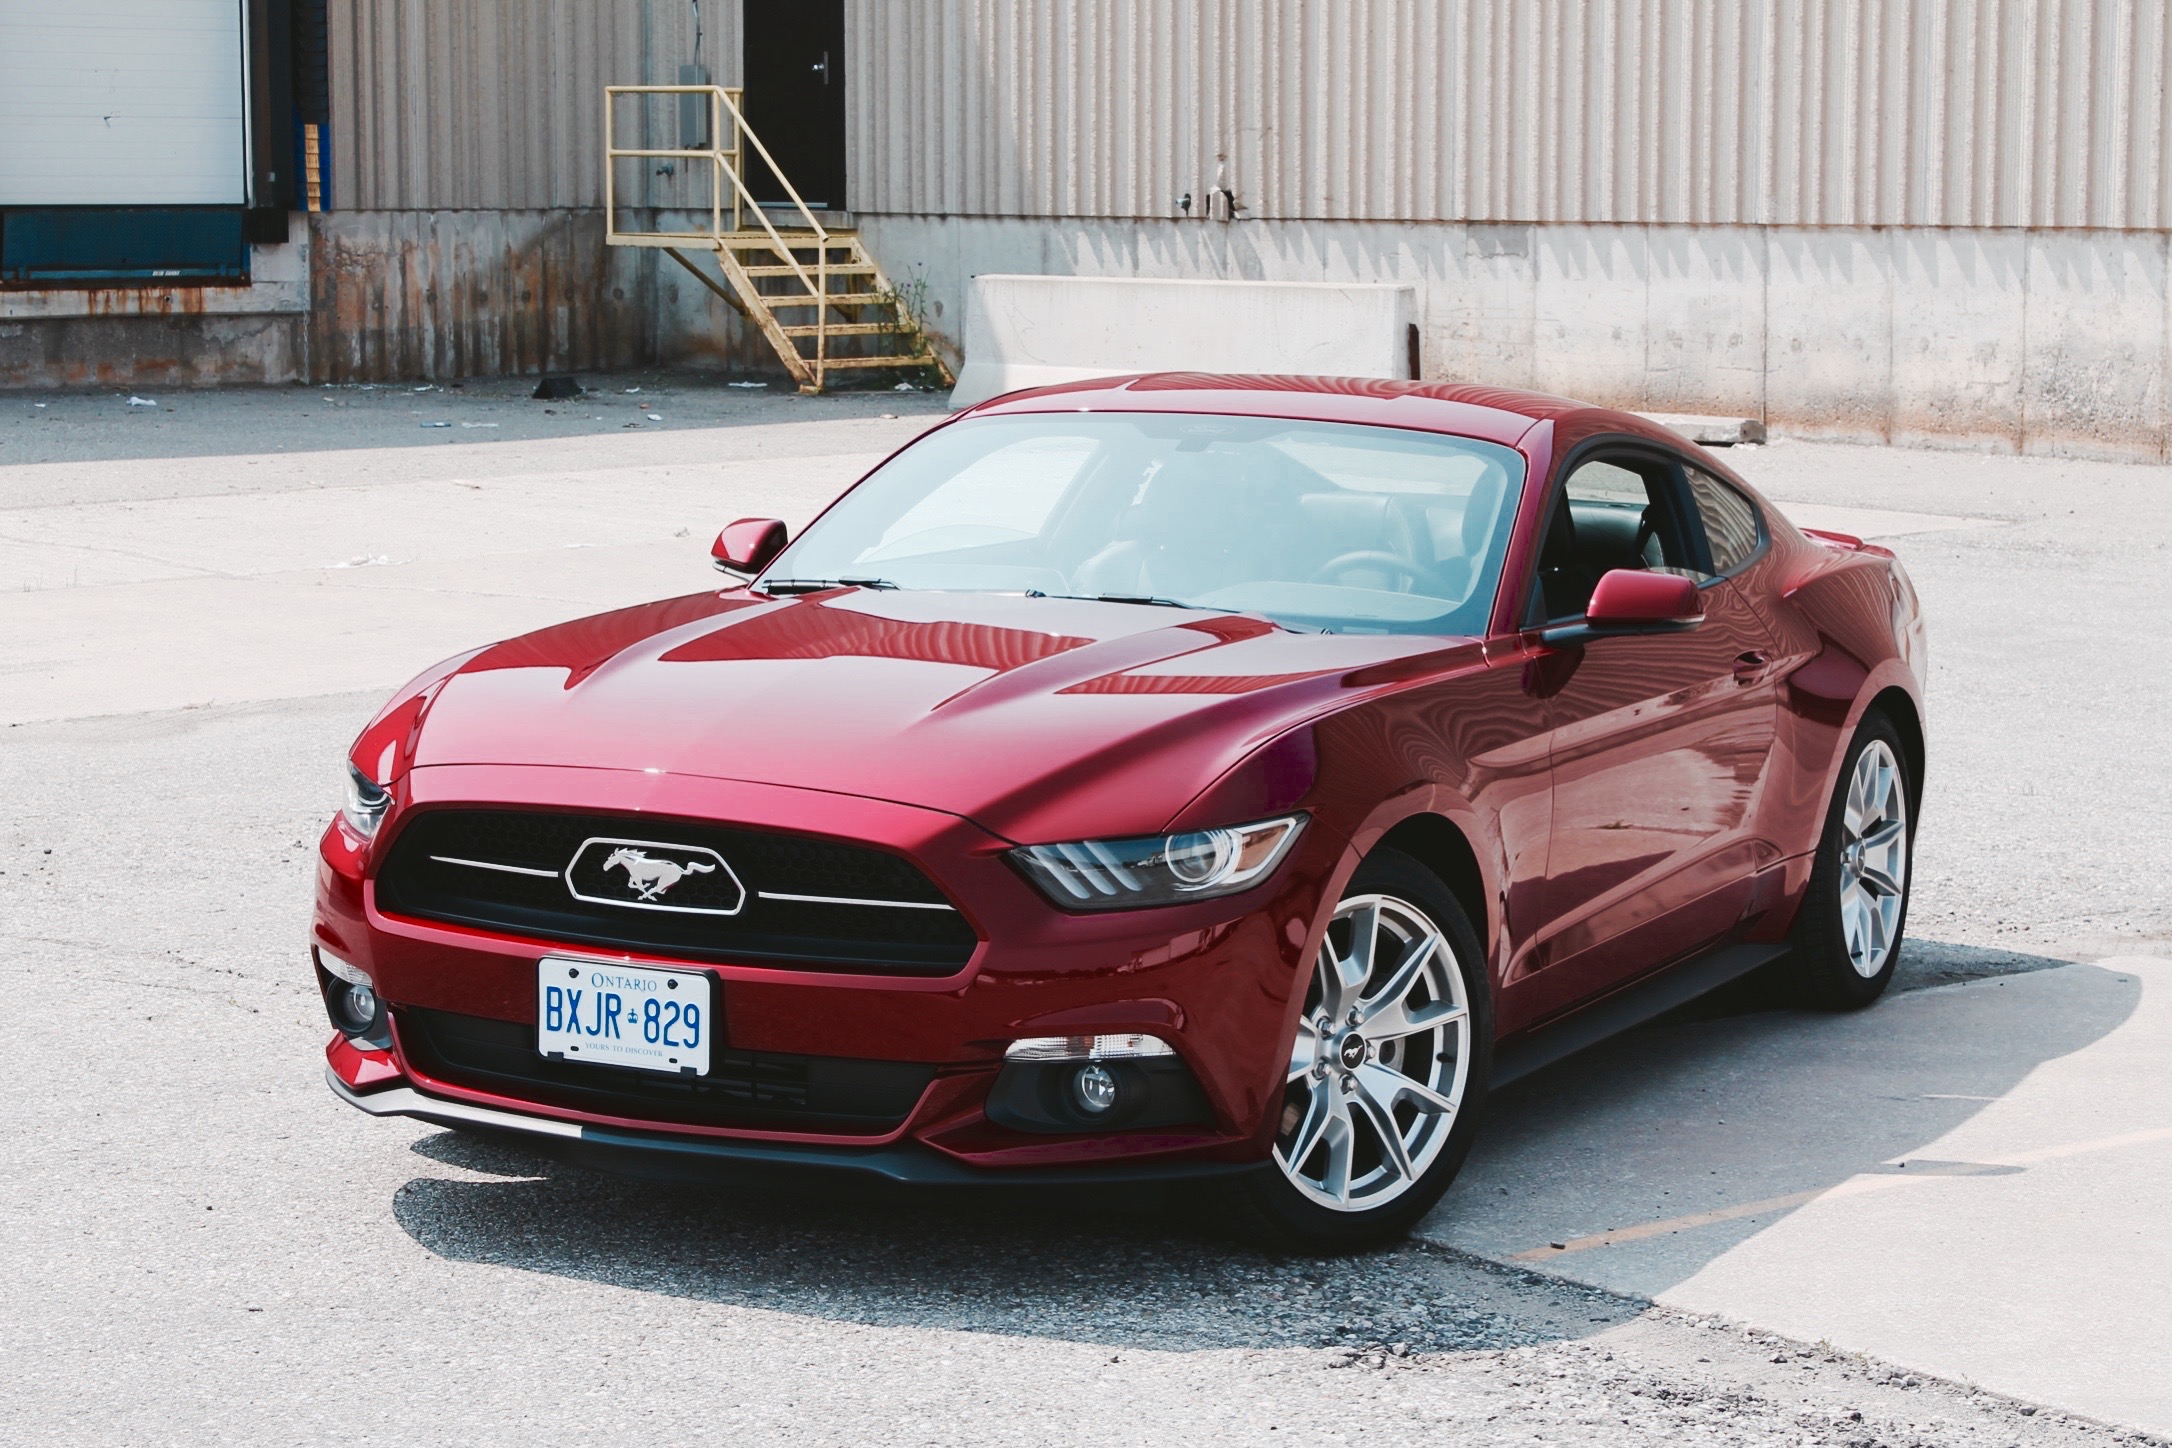 How much to lease a ford mustang #8